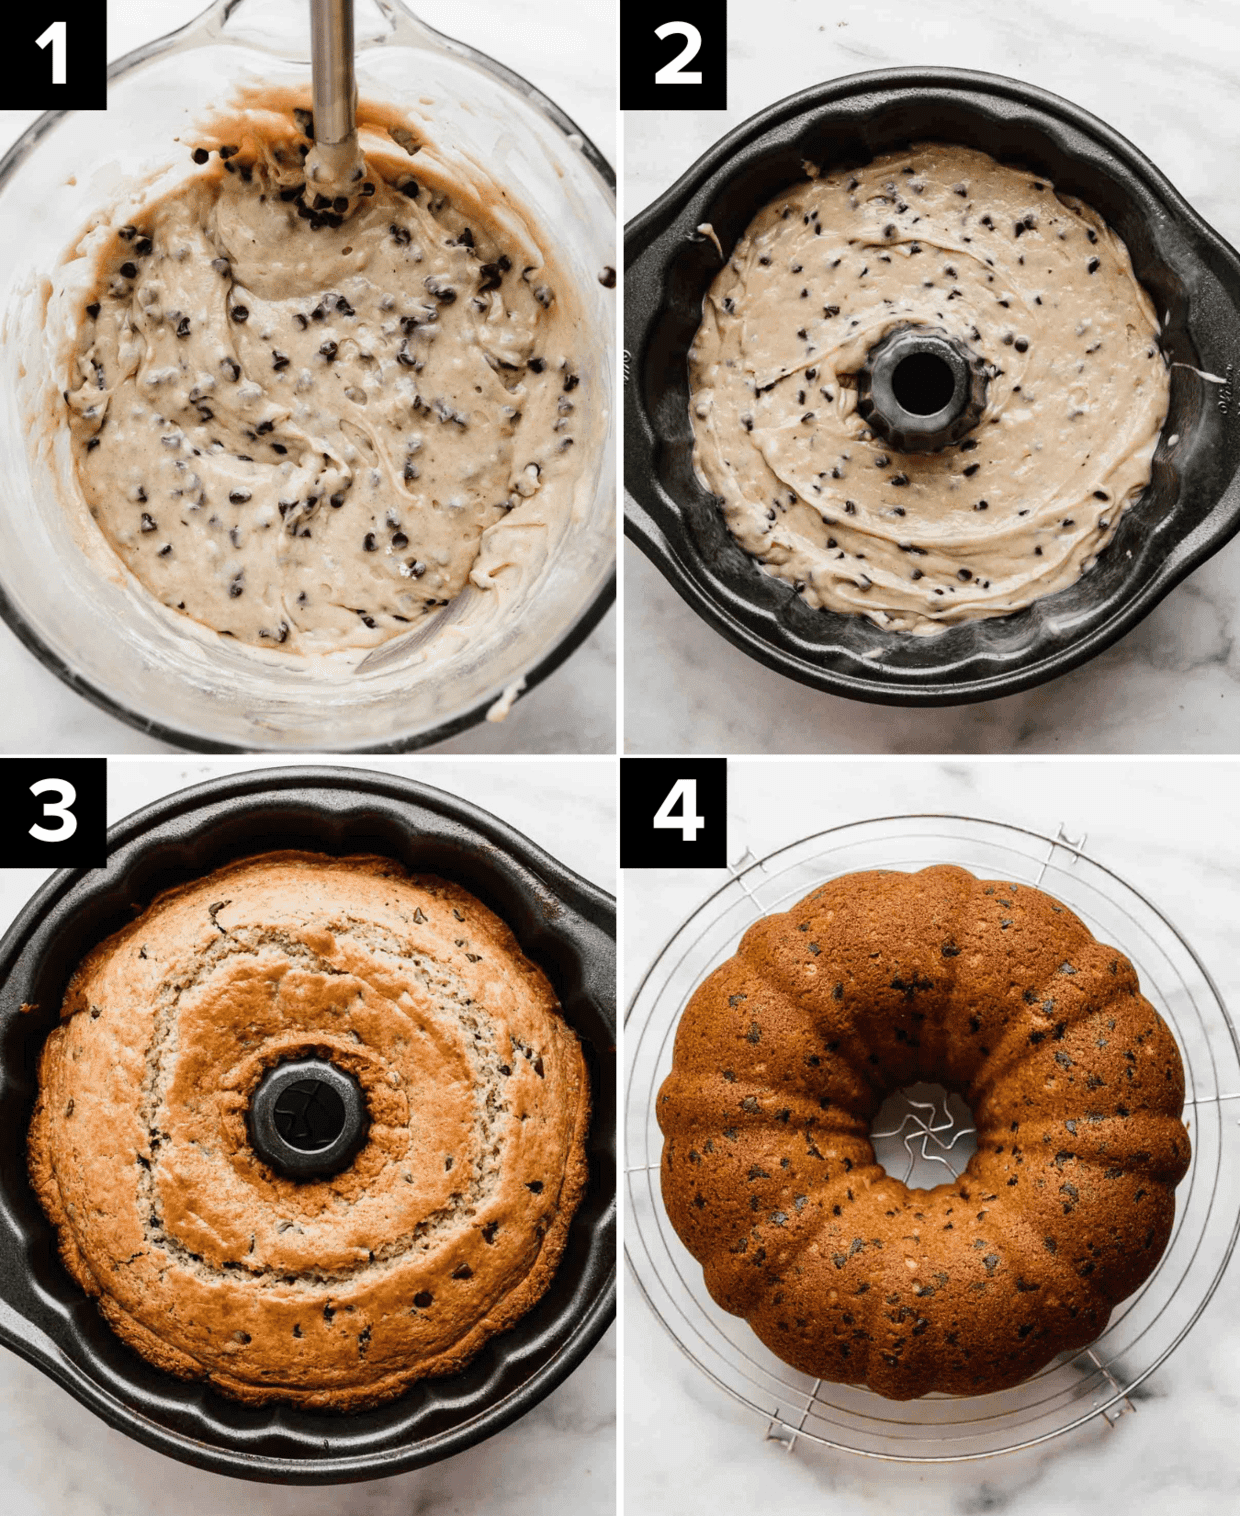 Four images showing Chocolate Chip Bundt Cake batter in a bowl, then a bundt pan, and then the Chocolate Chip Bundt Cake fully baked.